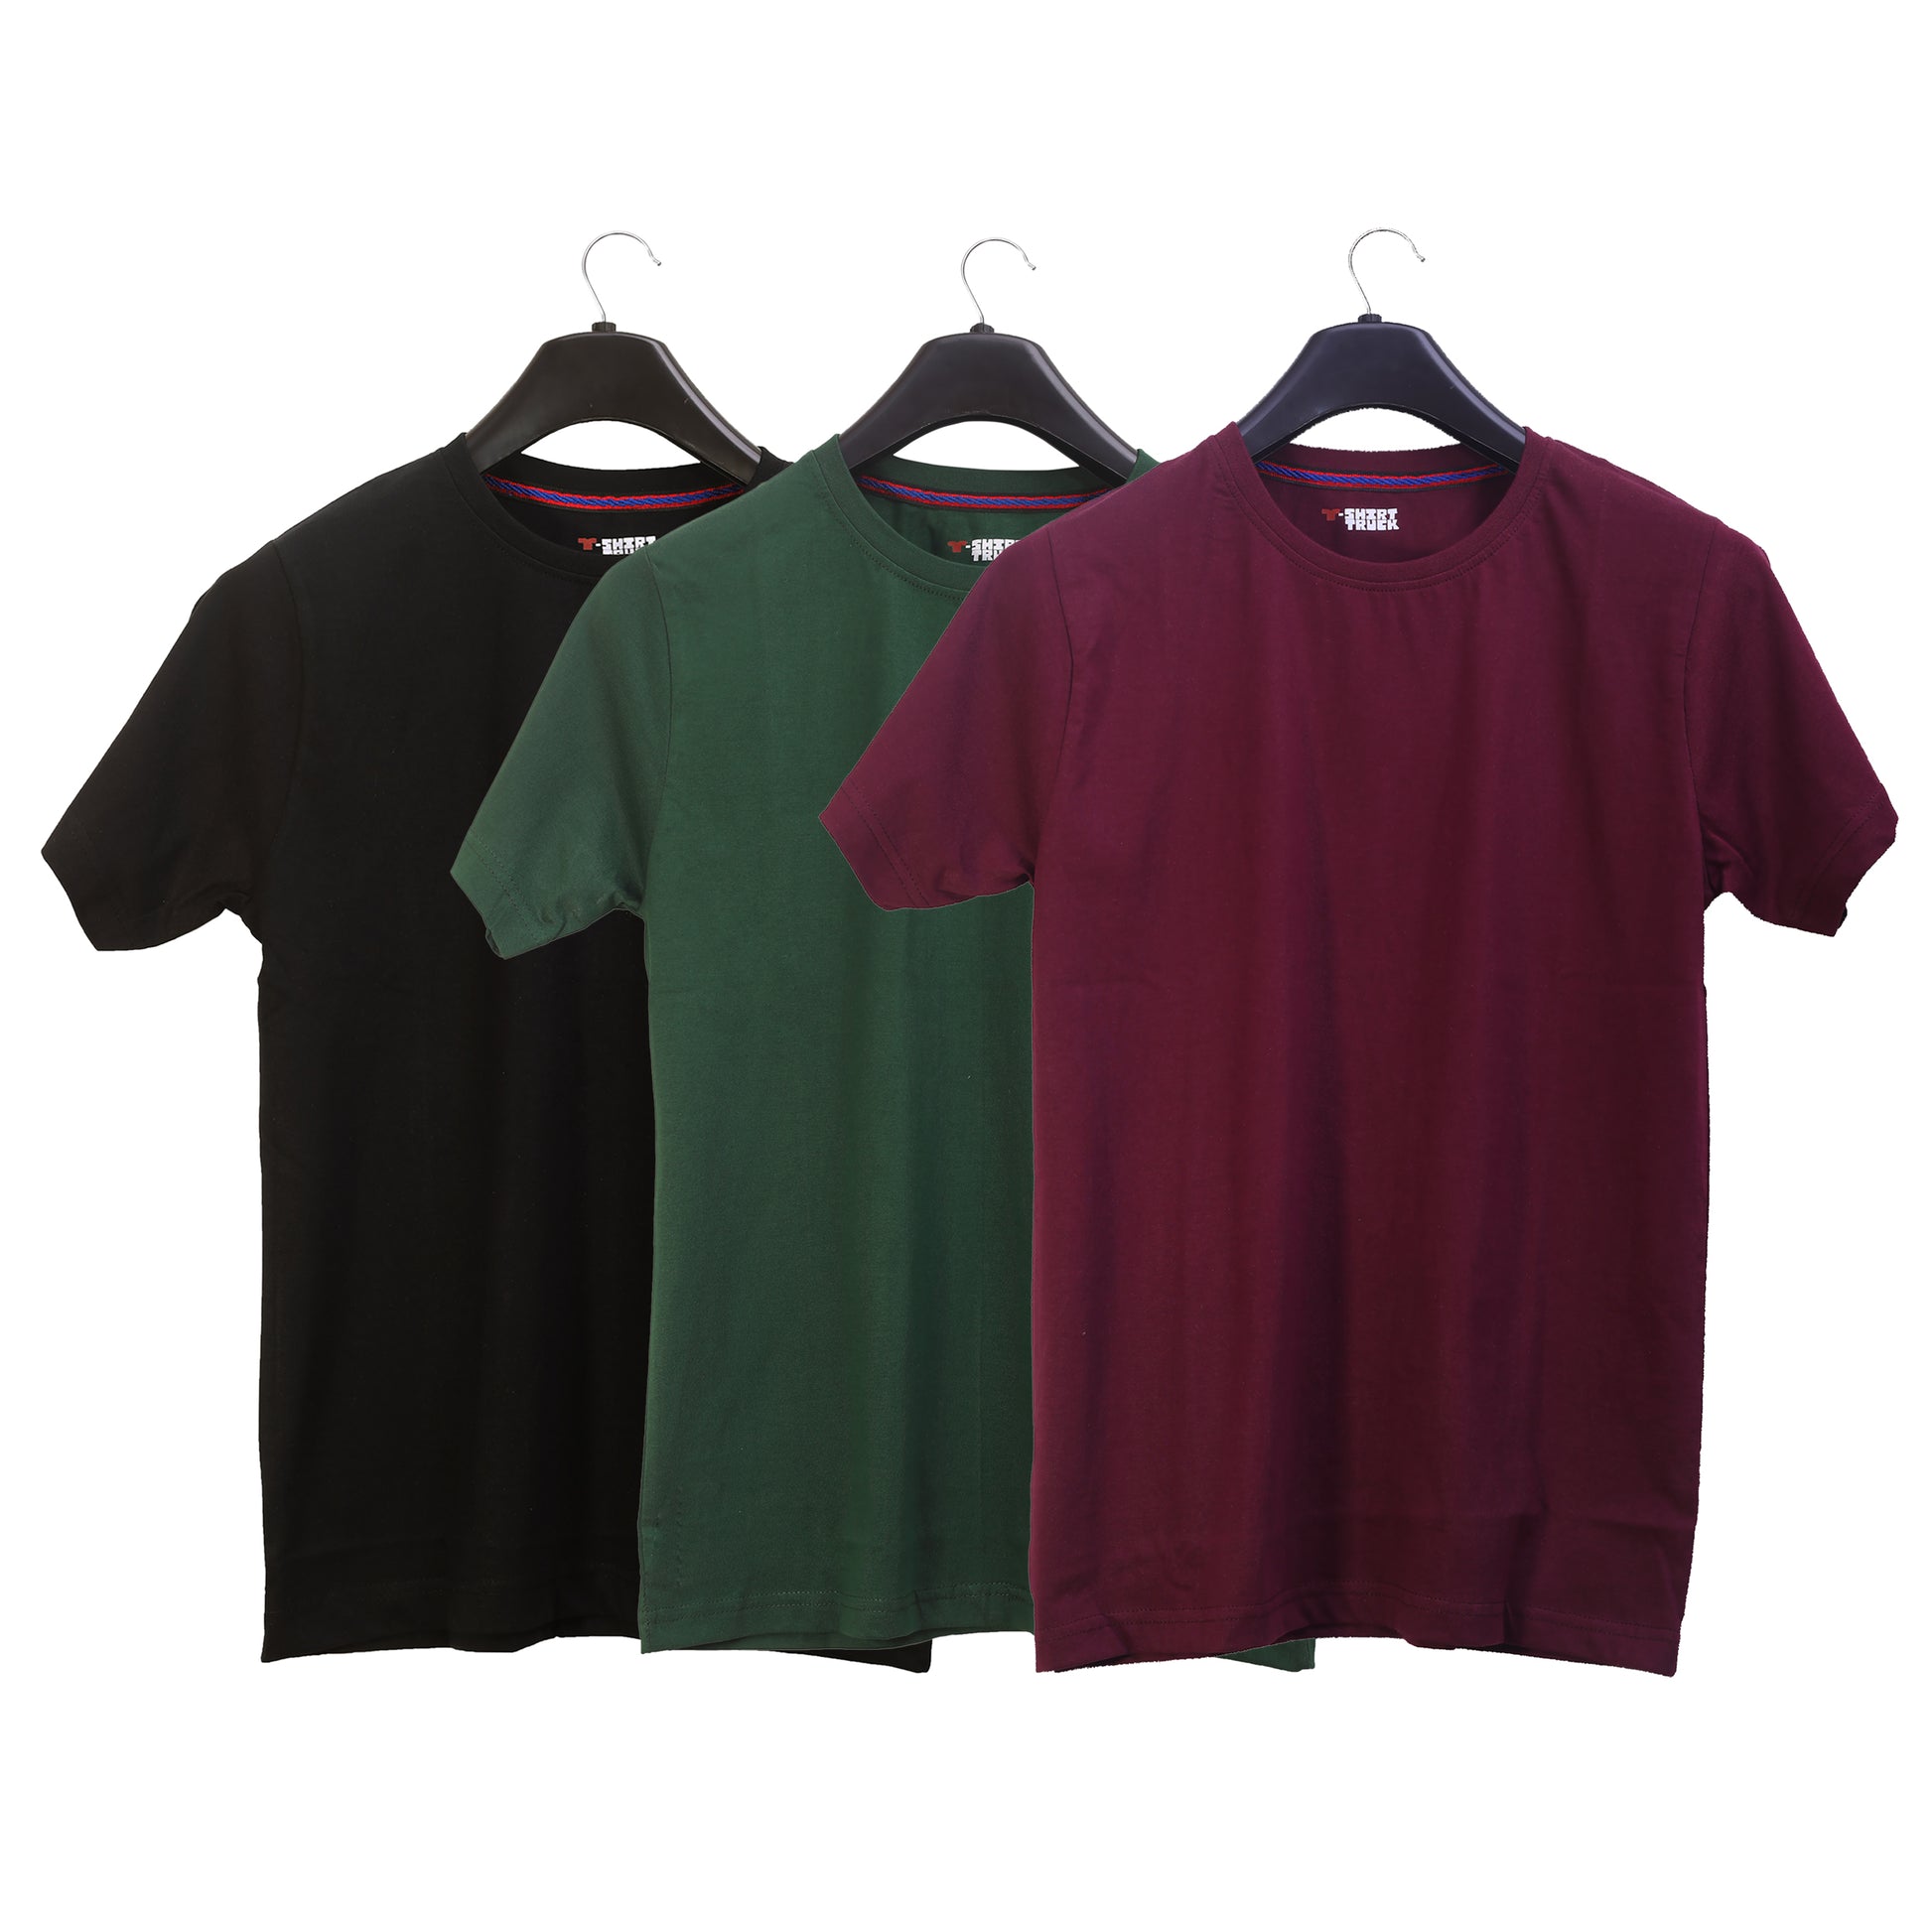 Unisex Round Neck Plain Solid Combo Pack of 3 T-shirts Black, Green & Maroon